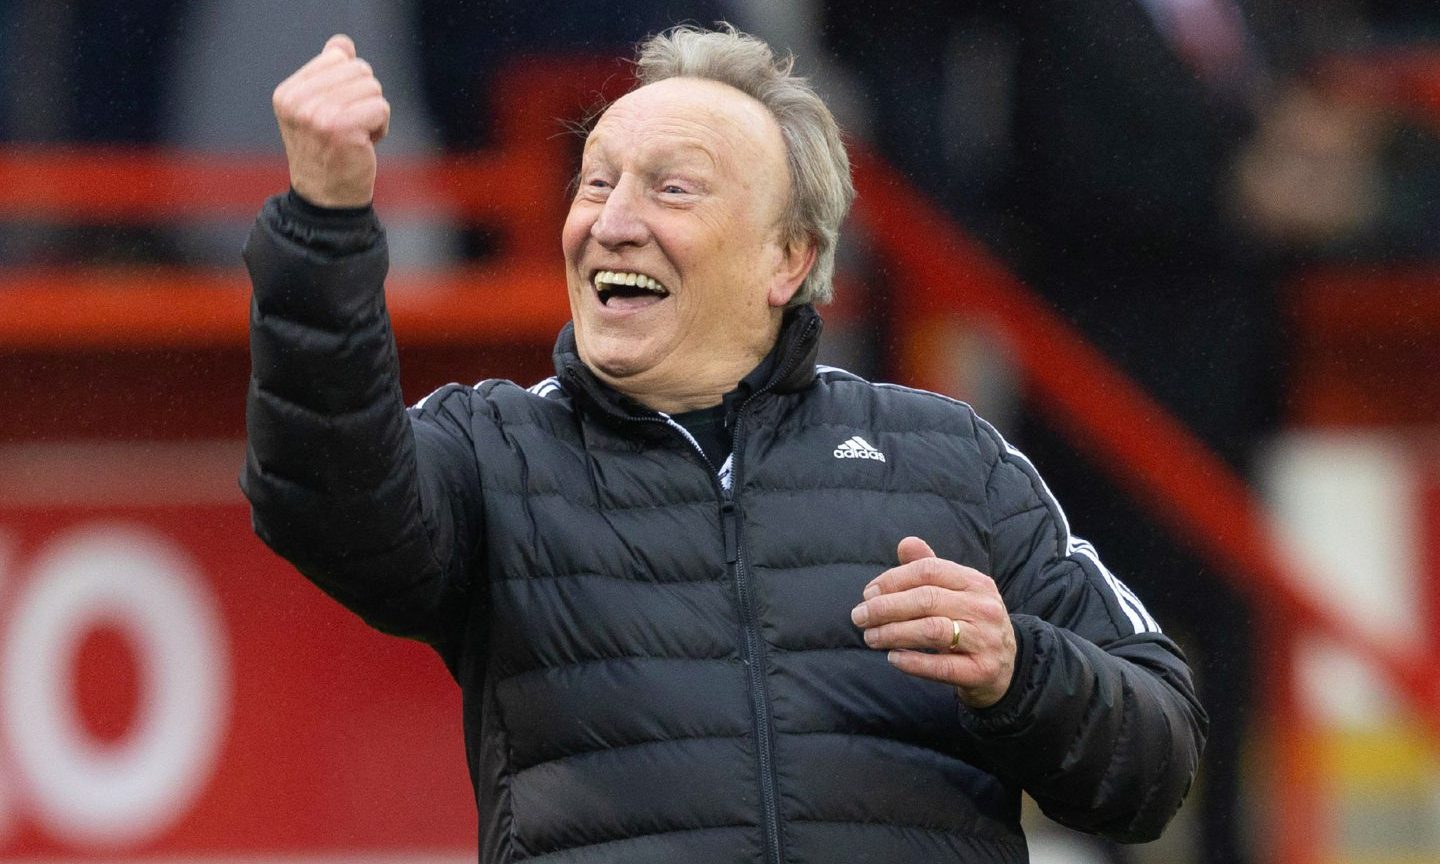 Neil Warnock celebrates at full-time after Aberdeen beat Kilmarnock in the Scottish Cup quarter-final. Image: SNS.